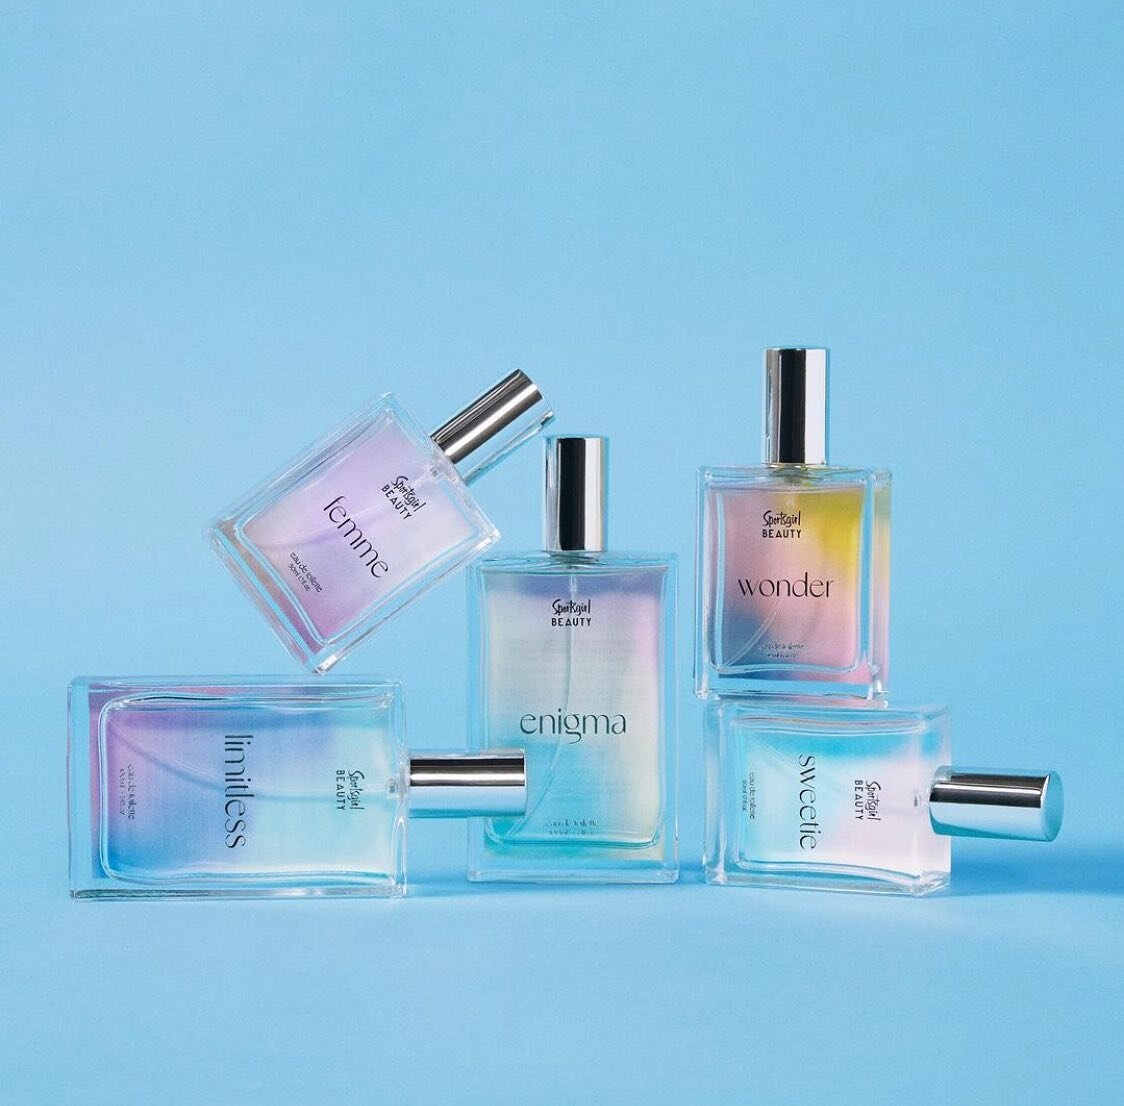 Available now! The all new @sportsgirlbeauty fragrance range; the latest evolution of Enigma, Femme, Wonder, Wonder, Sweetie and Limitless, available in-store and online @sportsgirl! 

#sportsgirl #beauty #fragrance #enigma #femme #wonder #sweetie #l